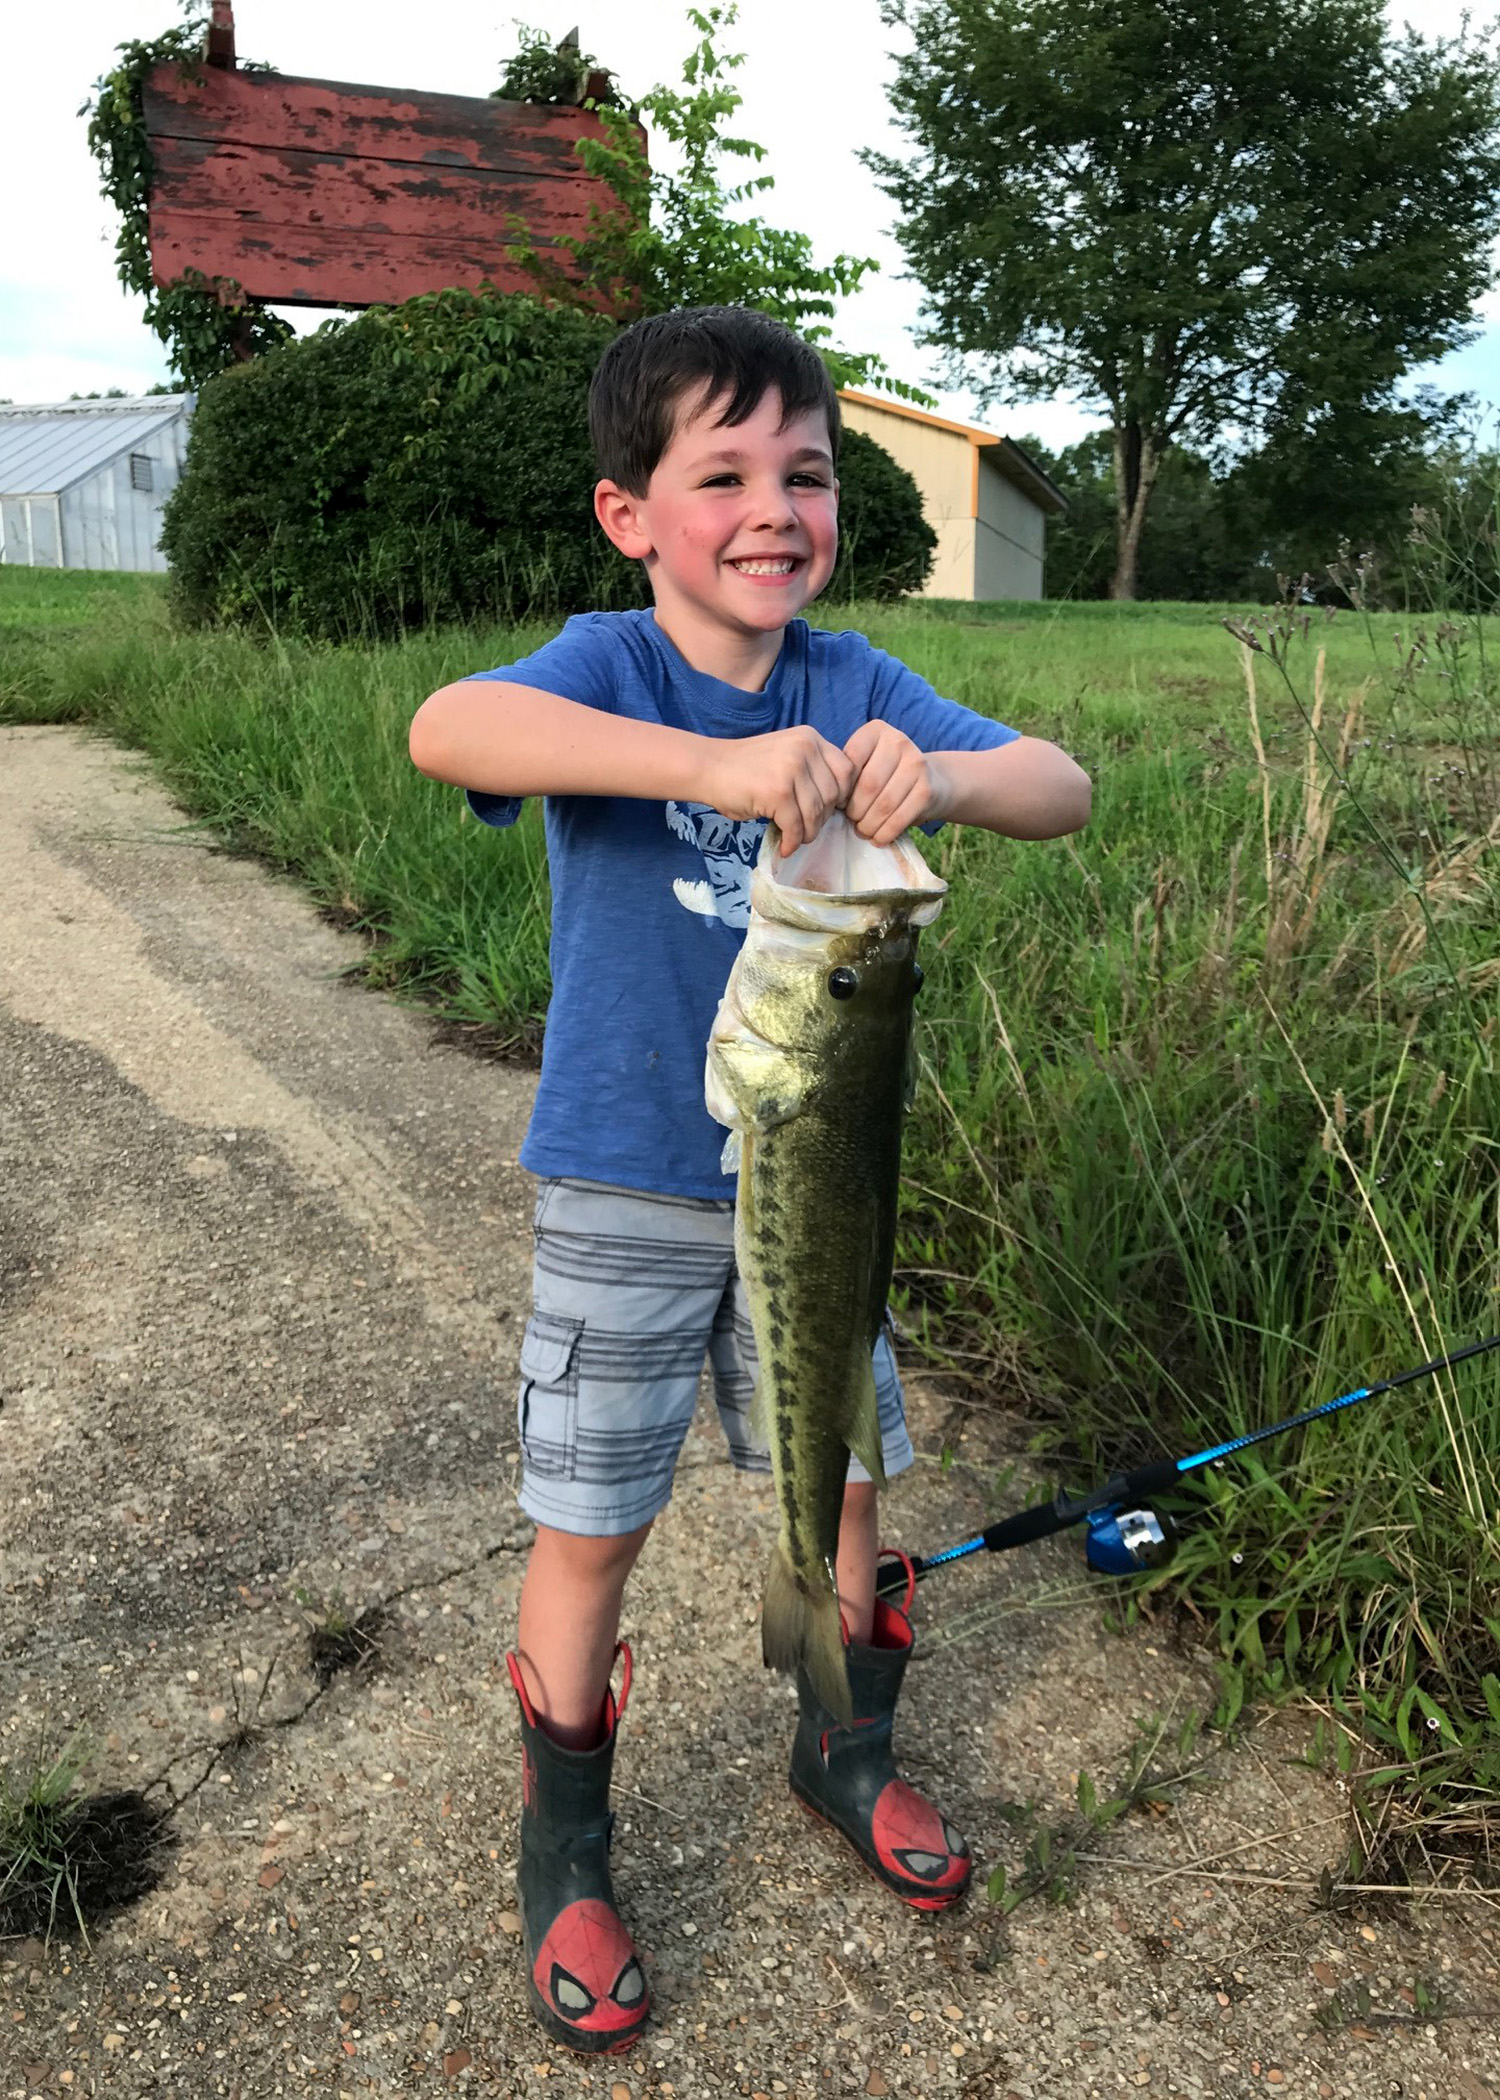 Consider many reasons to teach a child to fish